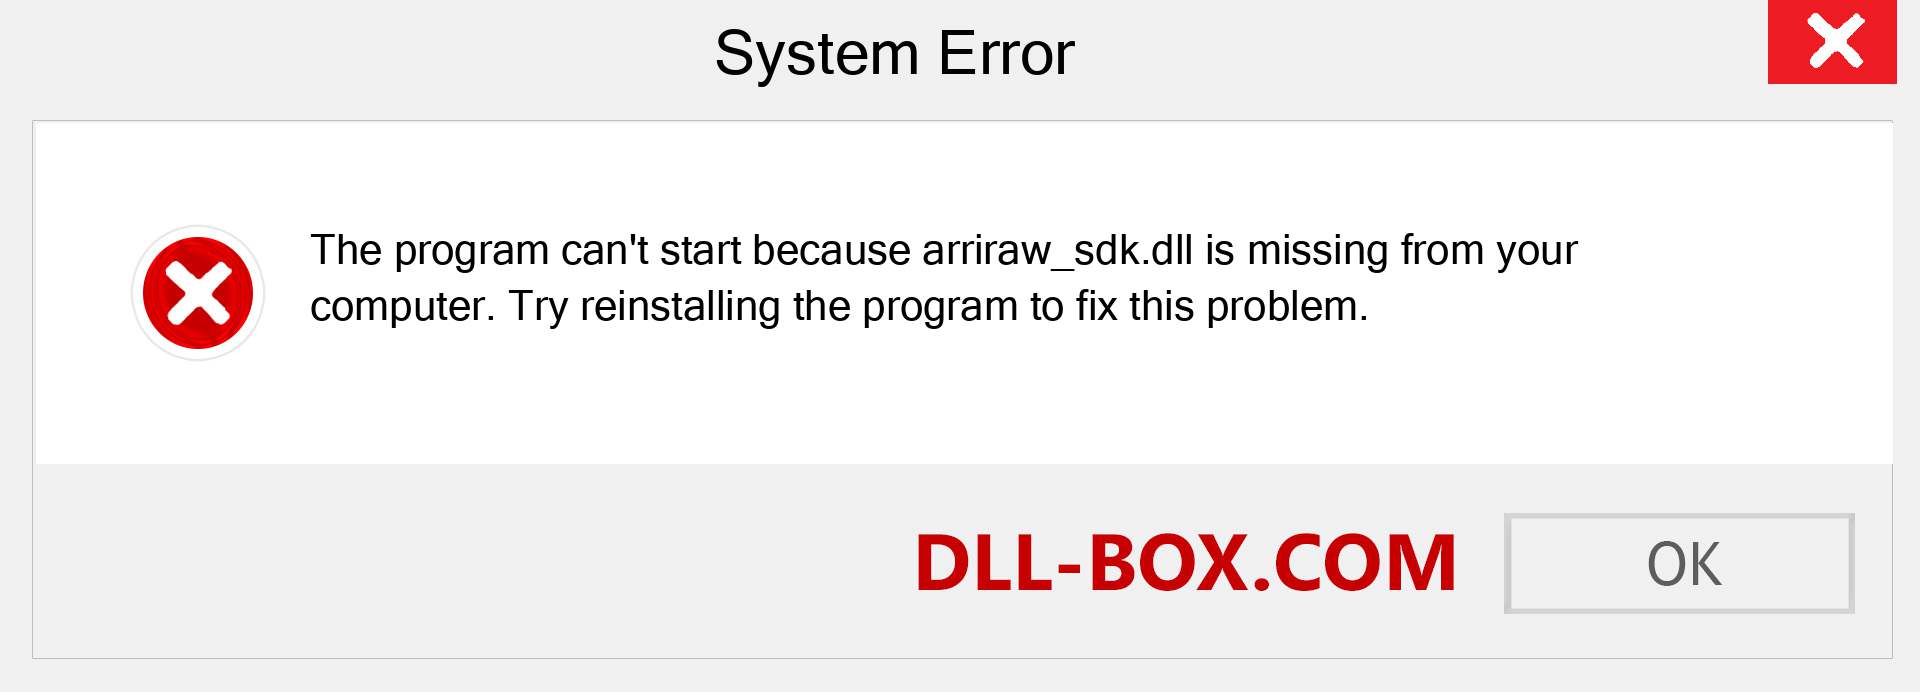  arriraw_sdk.dll file is missing?. Download for Windows 7, 8, 10 - Fix  arriraw_sdk dll Missing Error on Windows, photos, images